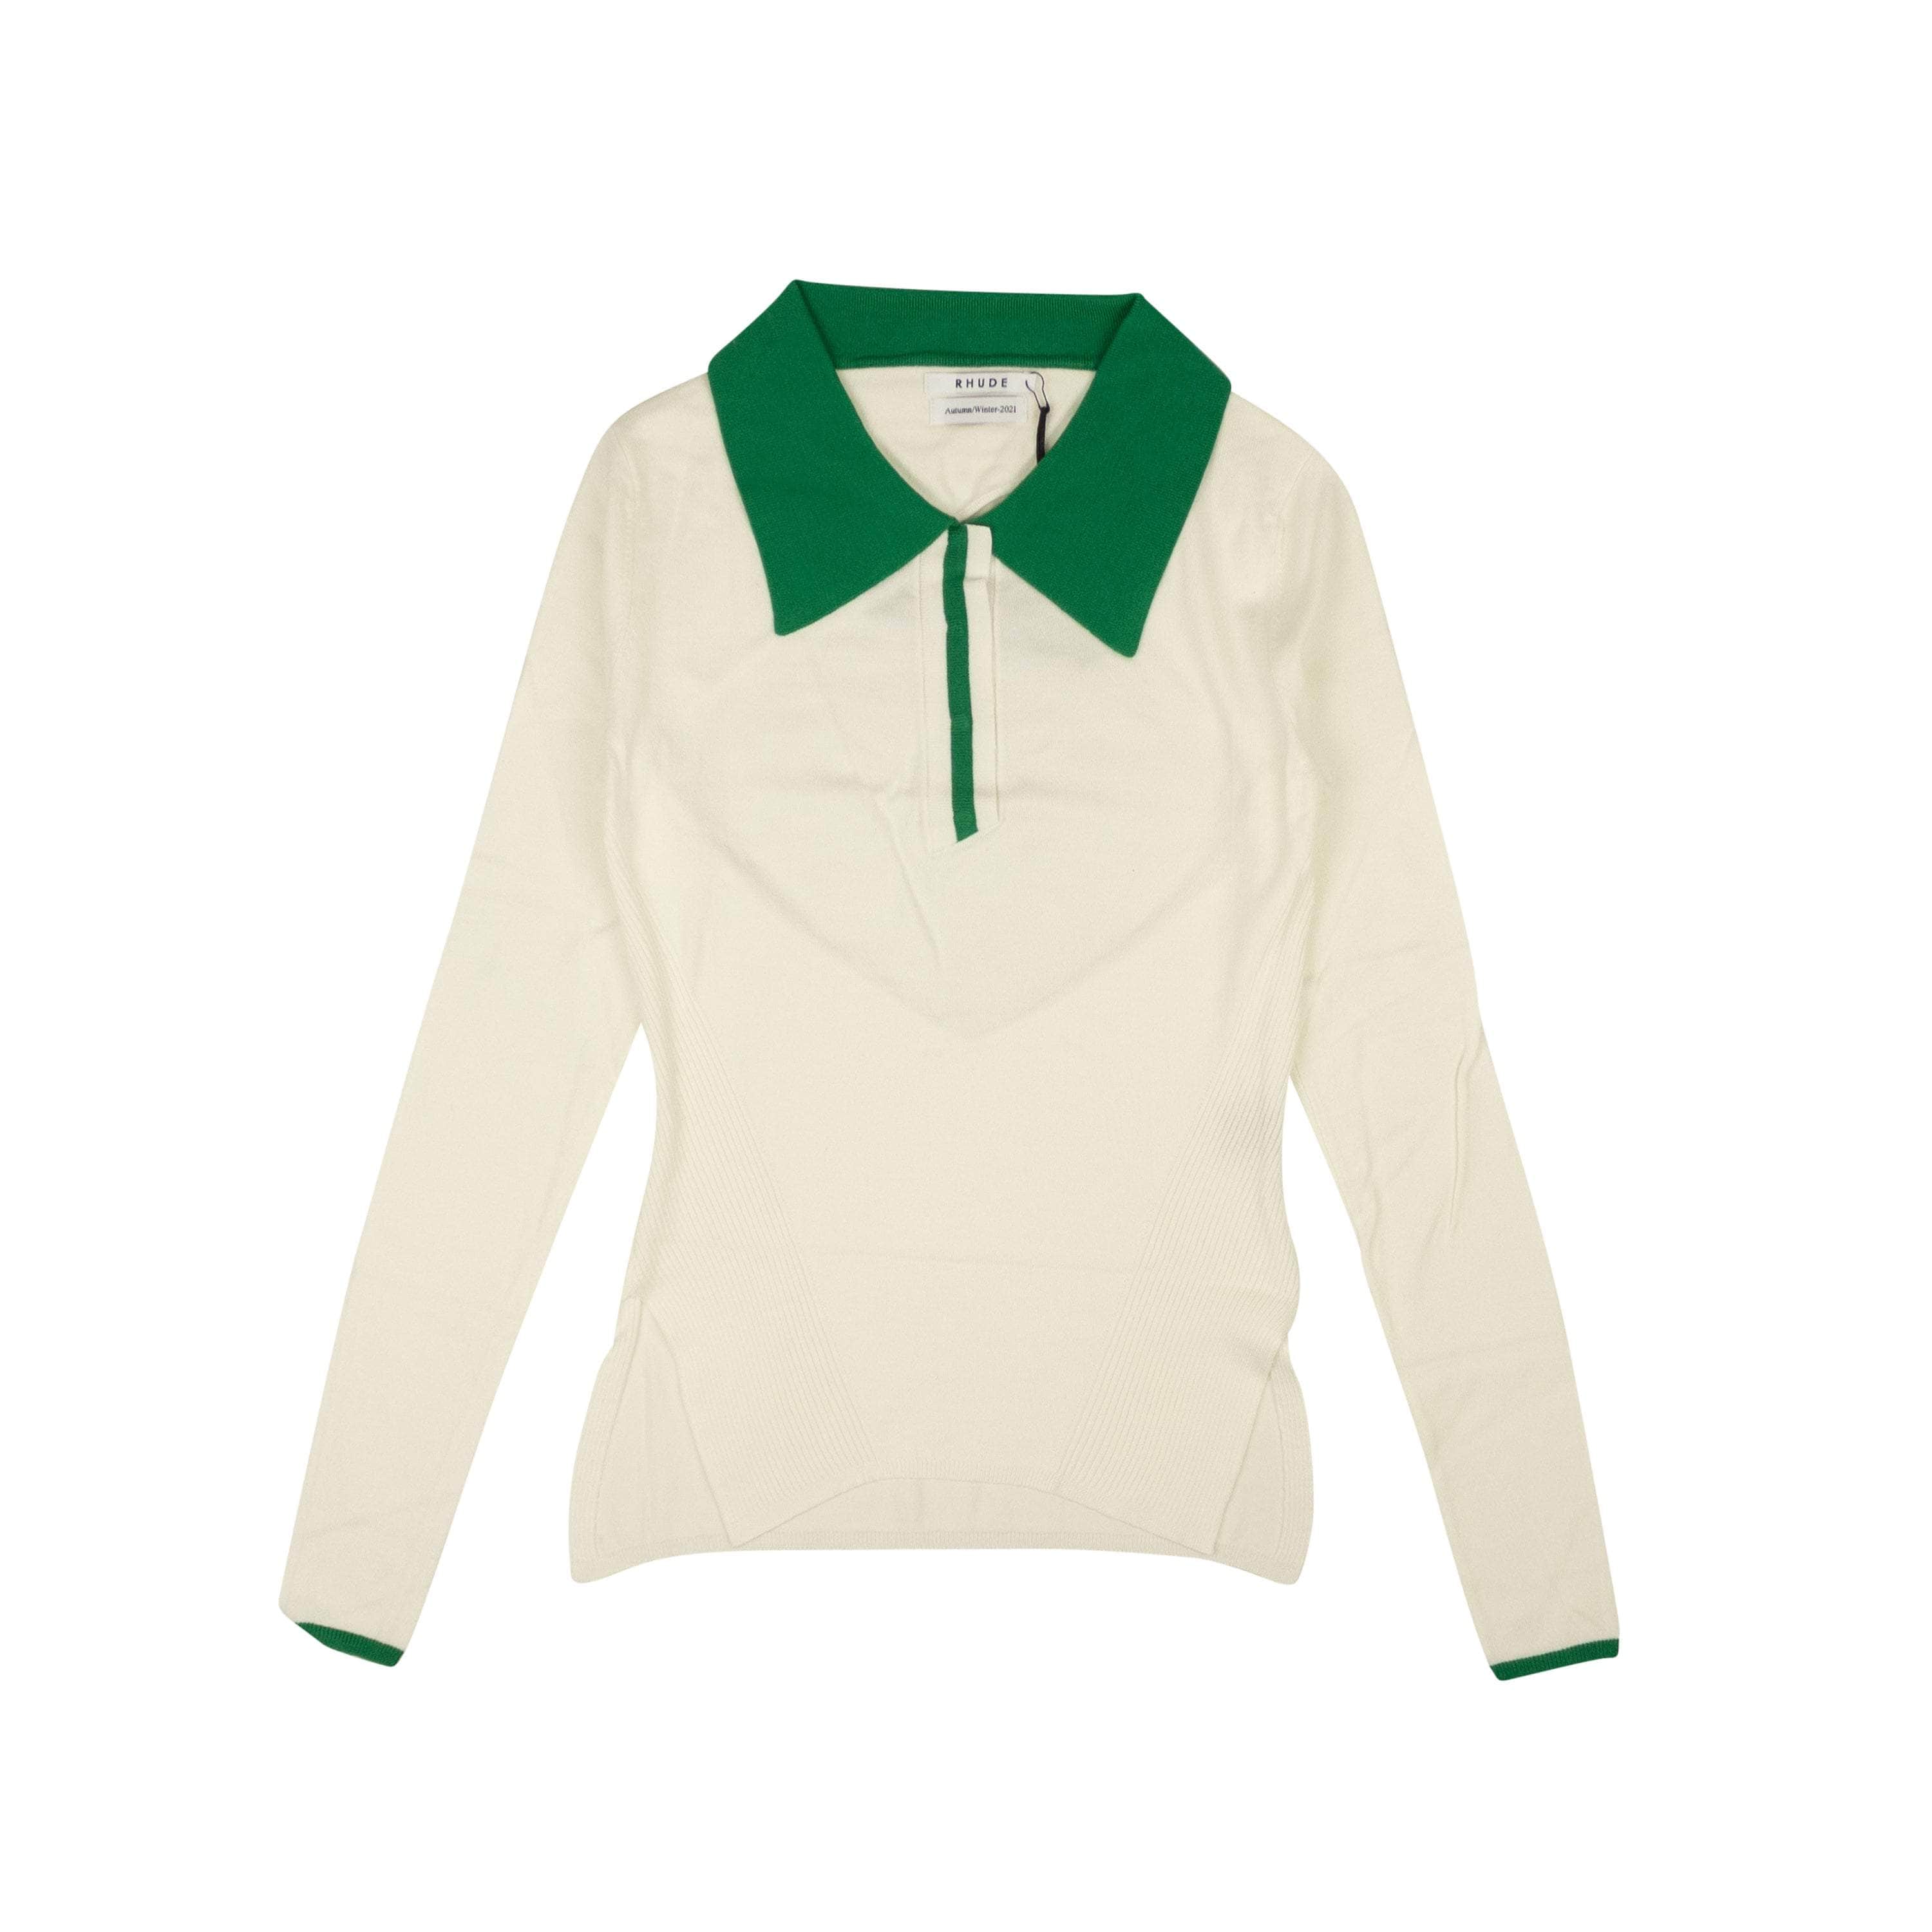 Rhude 250-500, channelenable-all, chicmi, couponcollection, gender-womens, main-clothing, rhude, size-s S Cream And Green Viscose F-1 Long Sleeve Polo Shirt RHD-XTPS-0049/S RHD-XTPS-0049/S